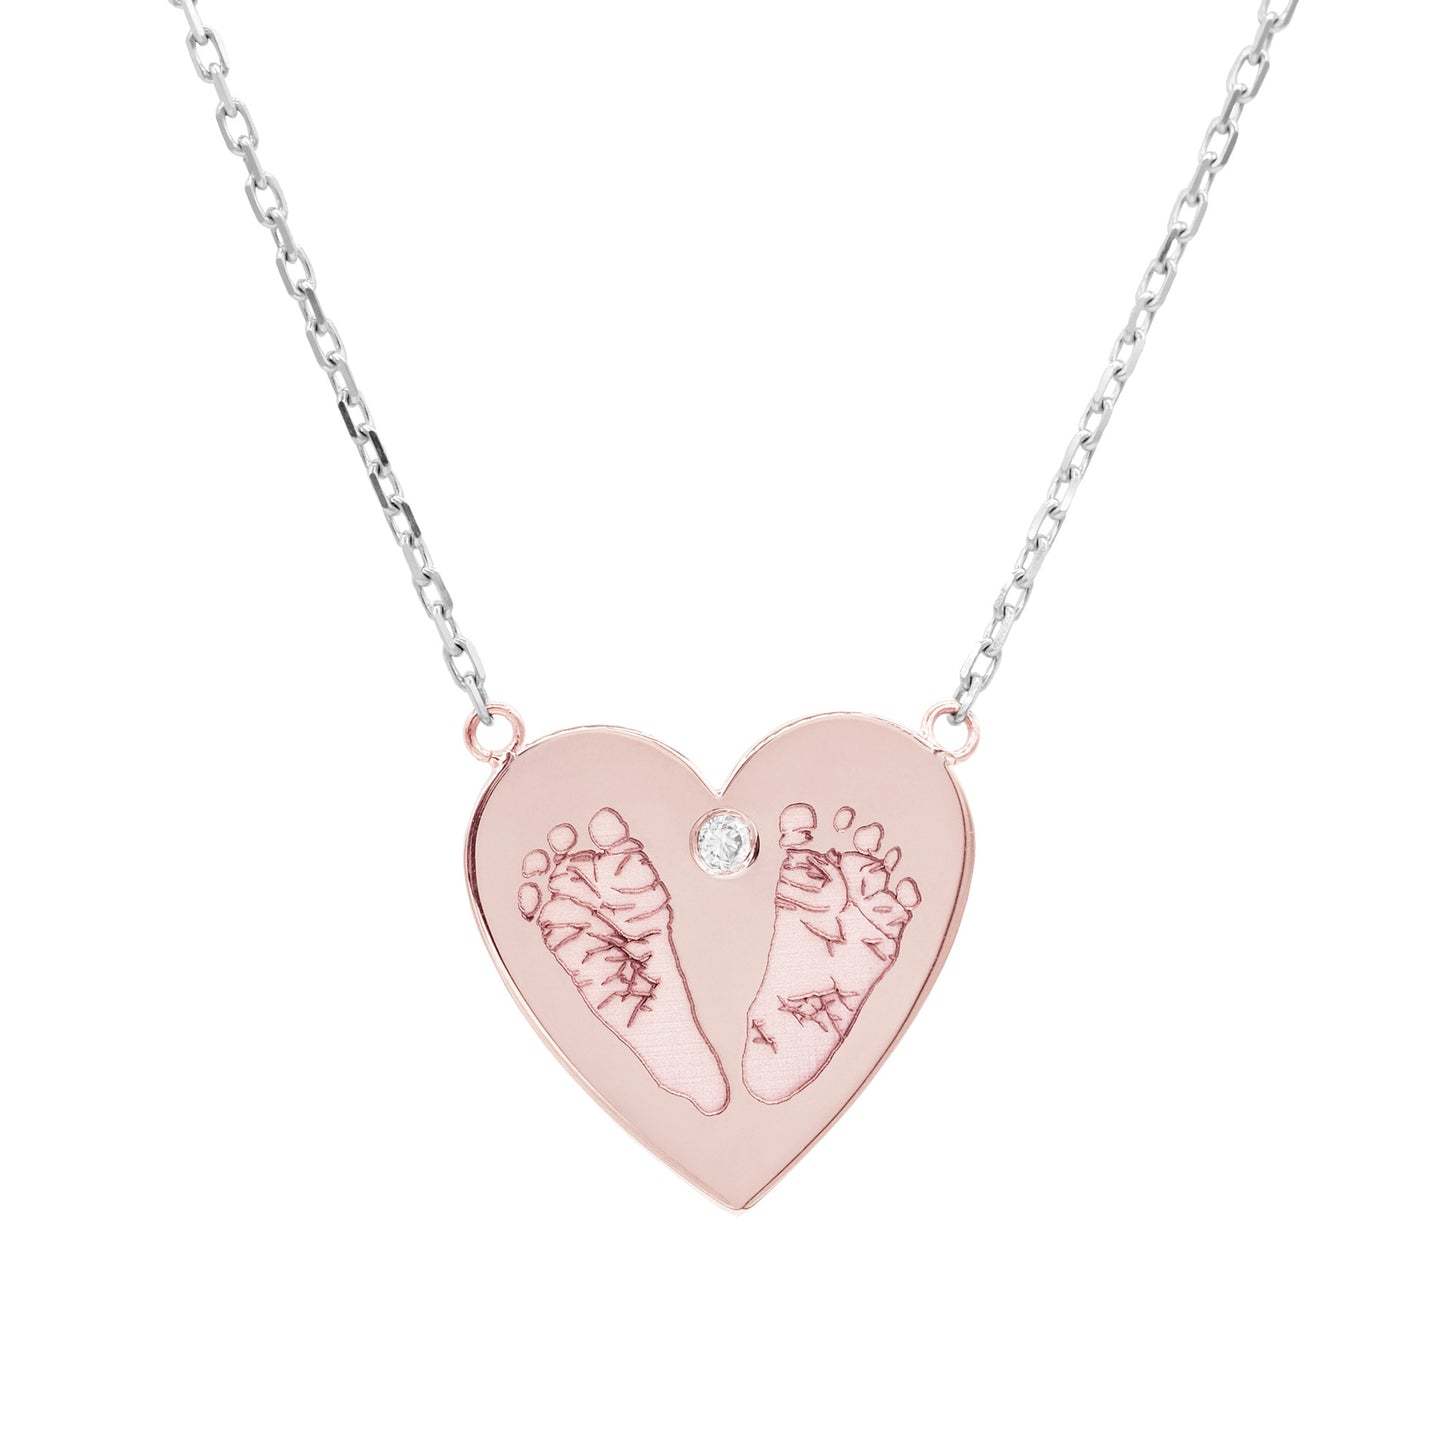 Handprints / Footprints Large Heart Necklace with a Diamond